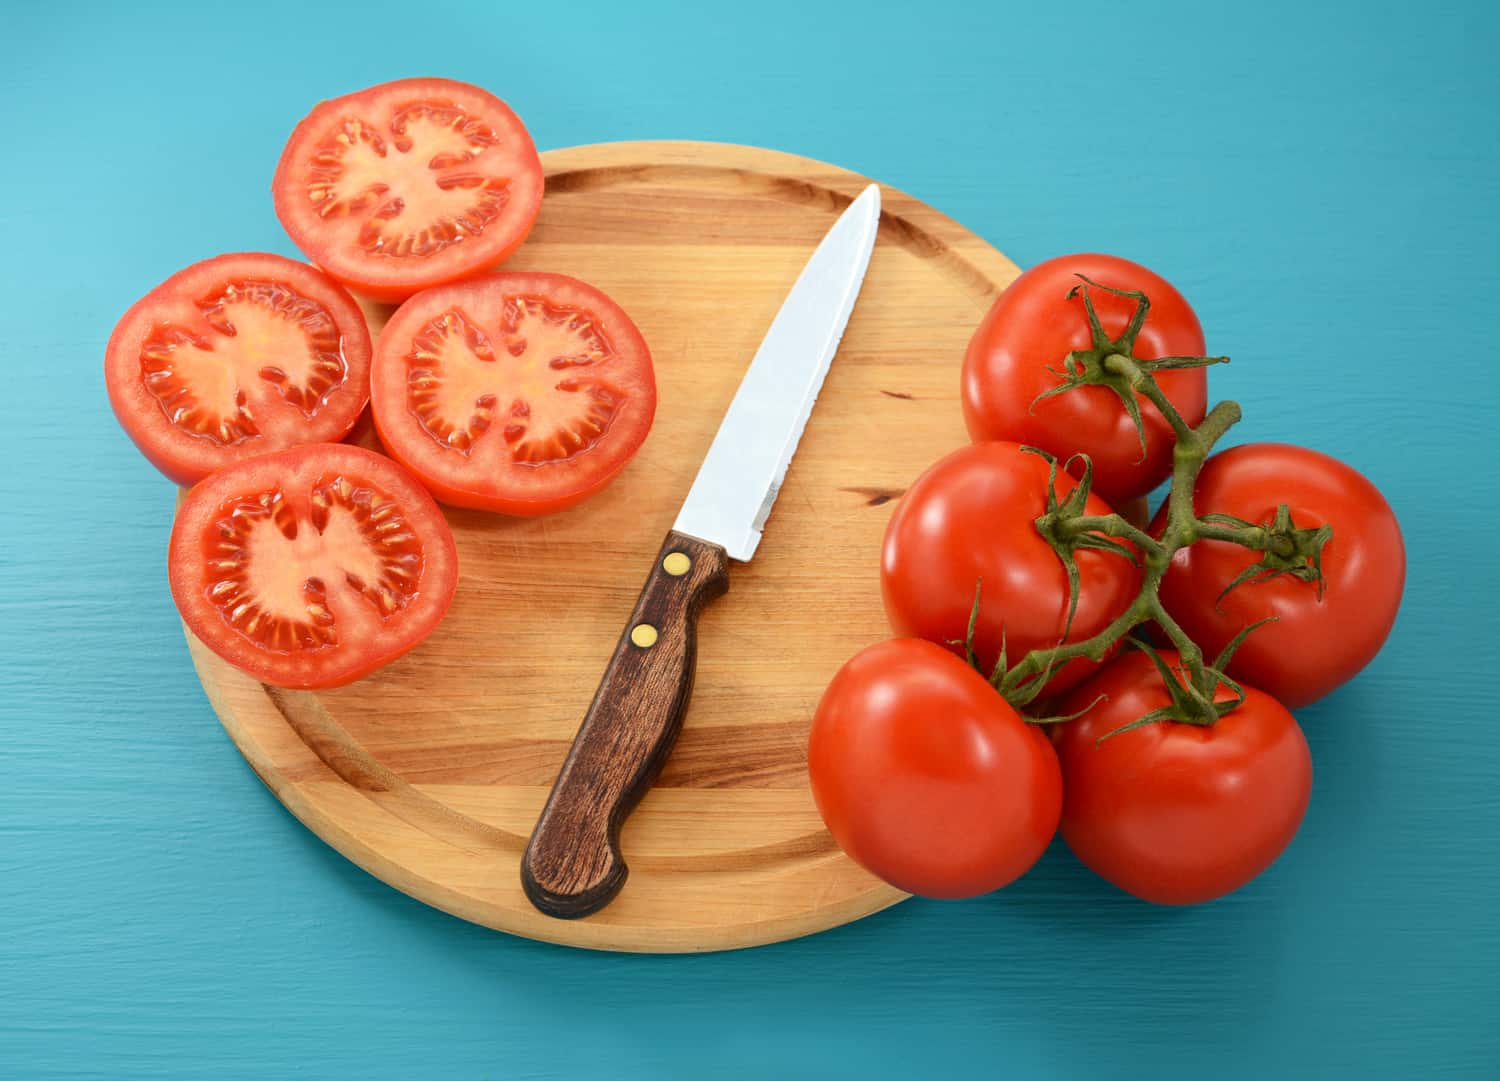 Ripe tomatoes, whole and sliced with serrated knife on wooden cutting board